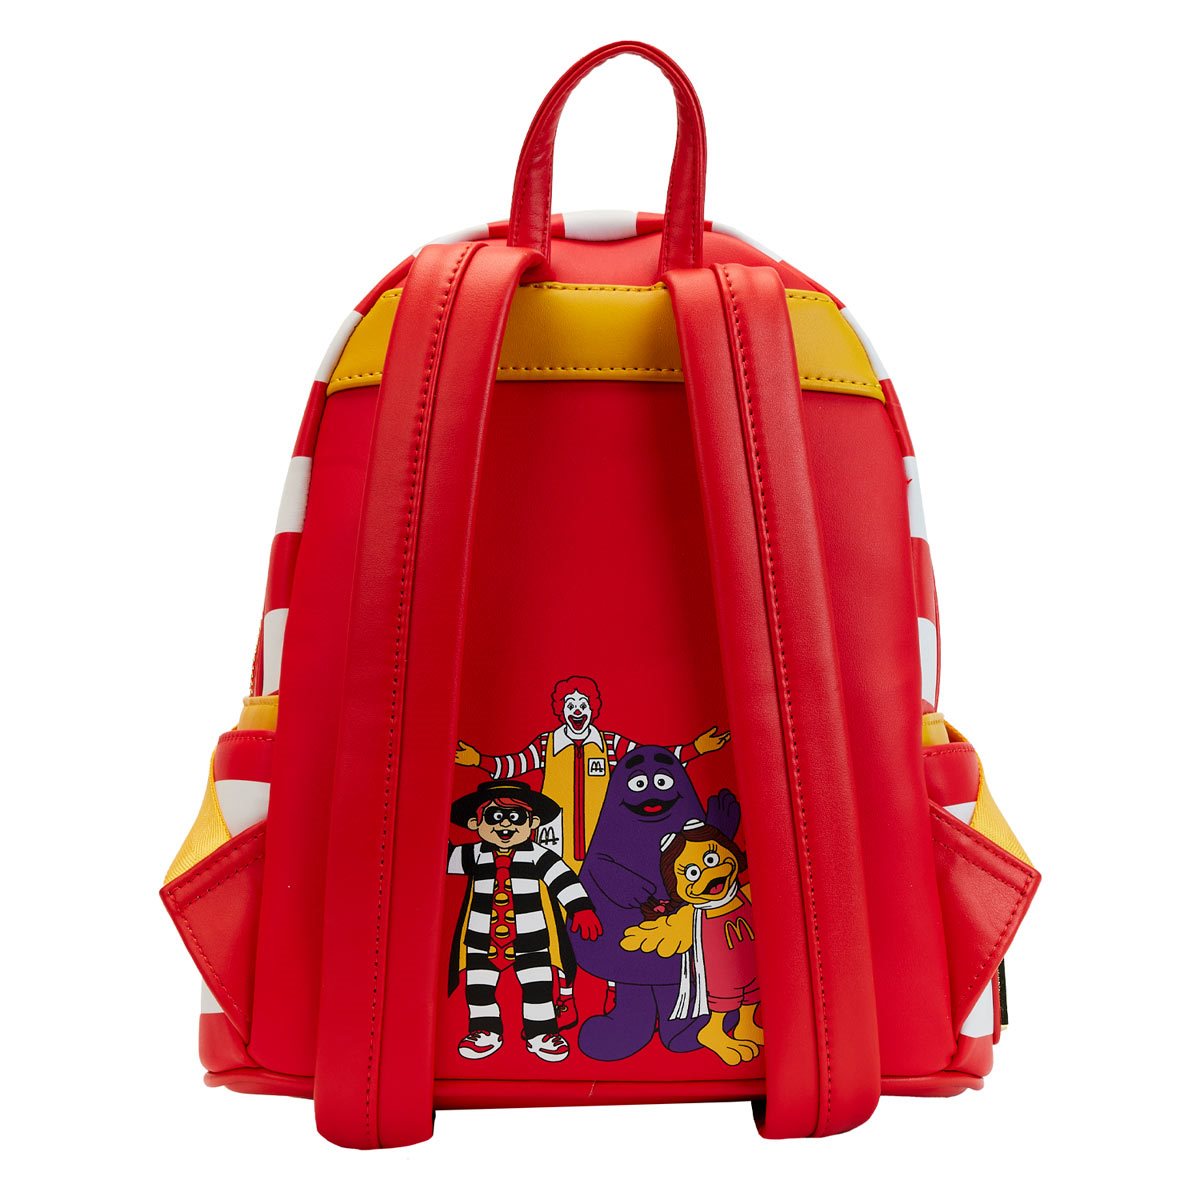 Buy McDonald's Happy Meal Mini Backpack at Loungefly.